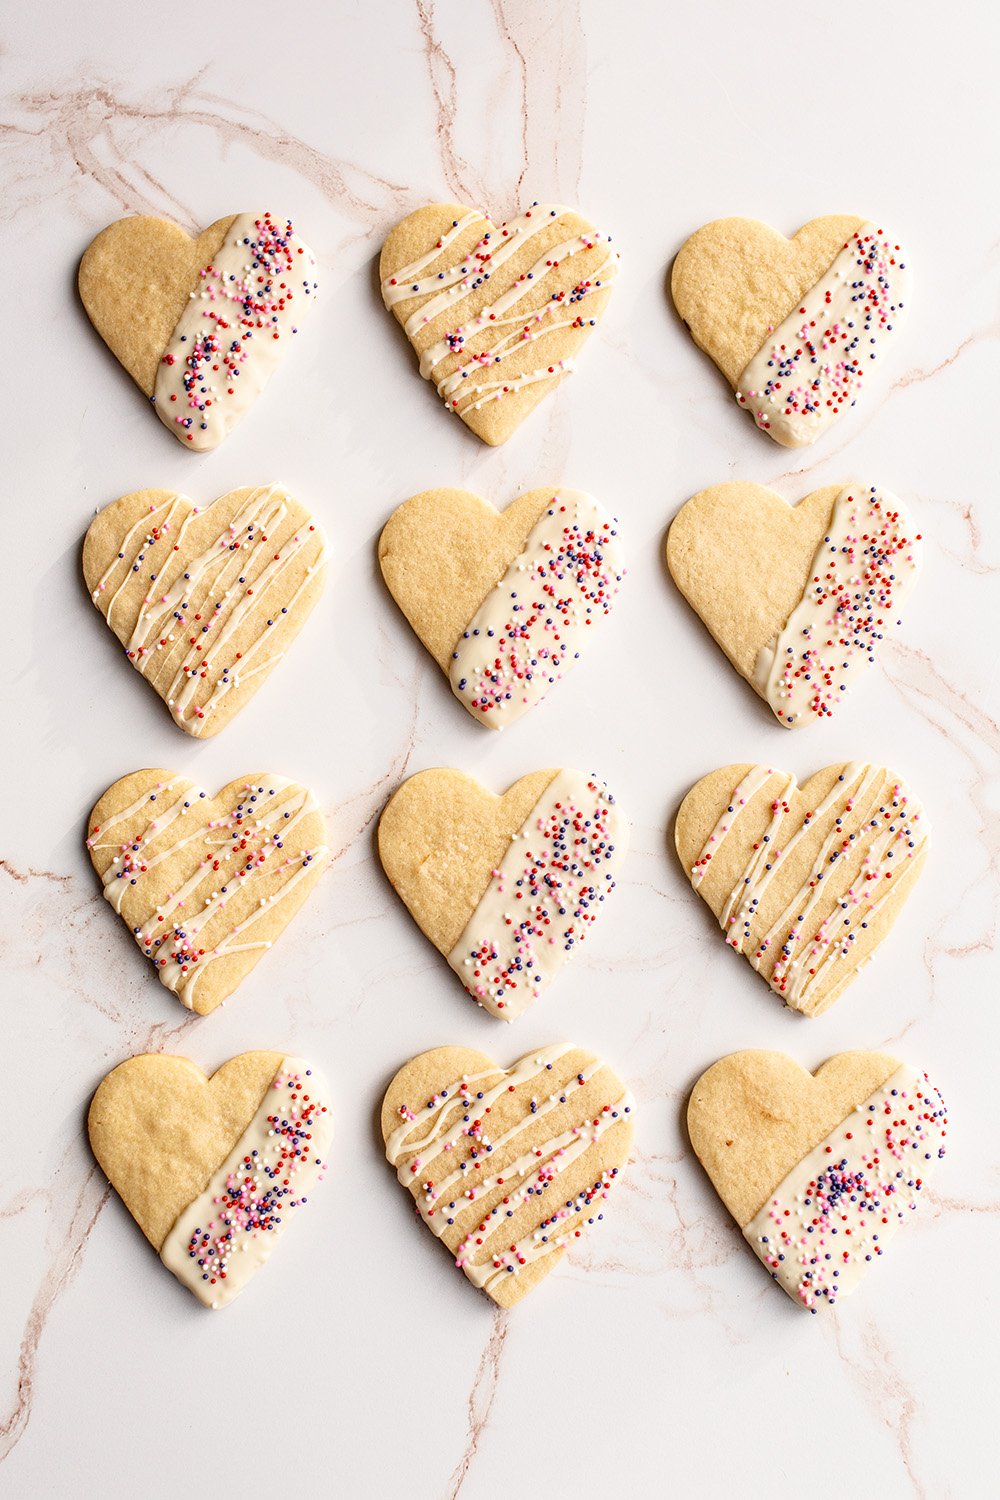 a neat row of Valentine’s Day Sugar Cookies all half dipped or drizzled with white chocolate and topped with sprinkles.